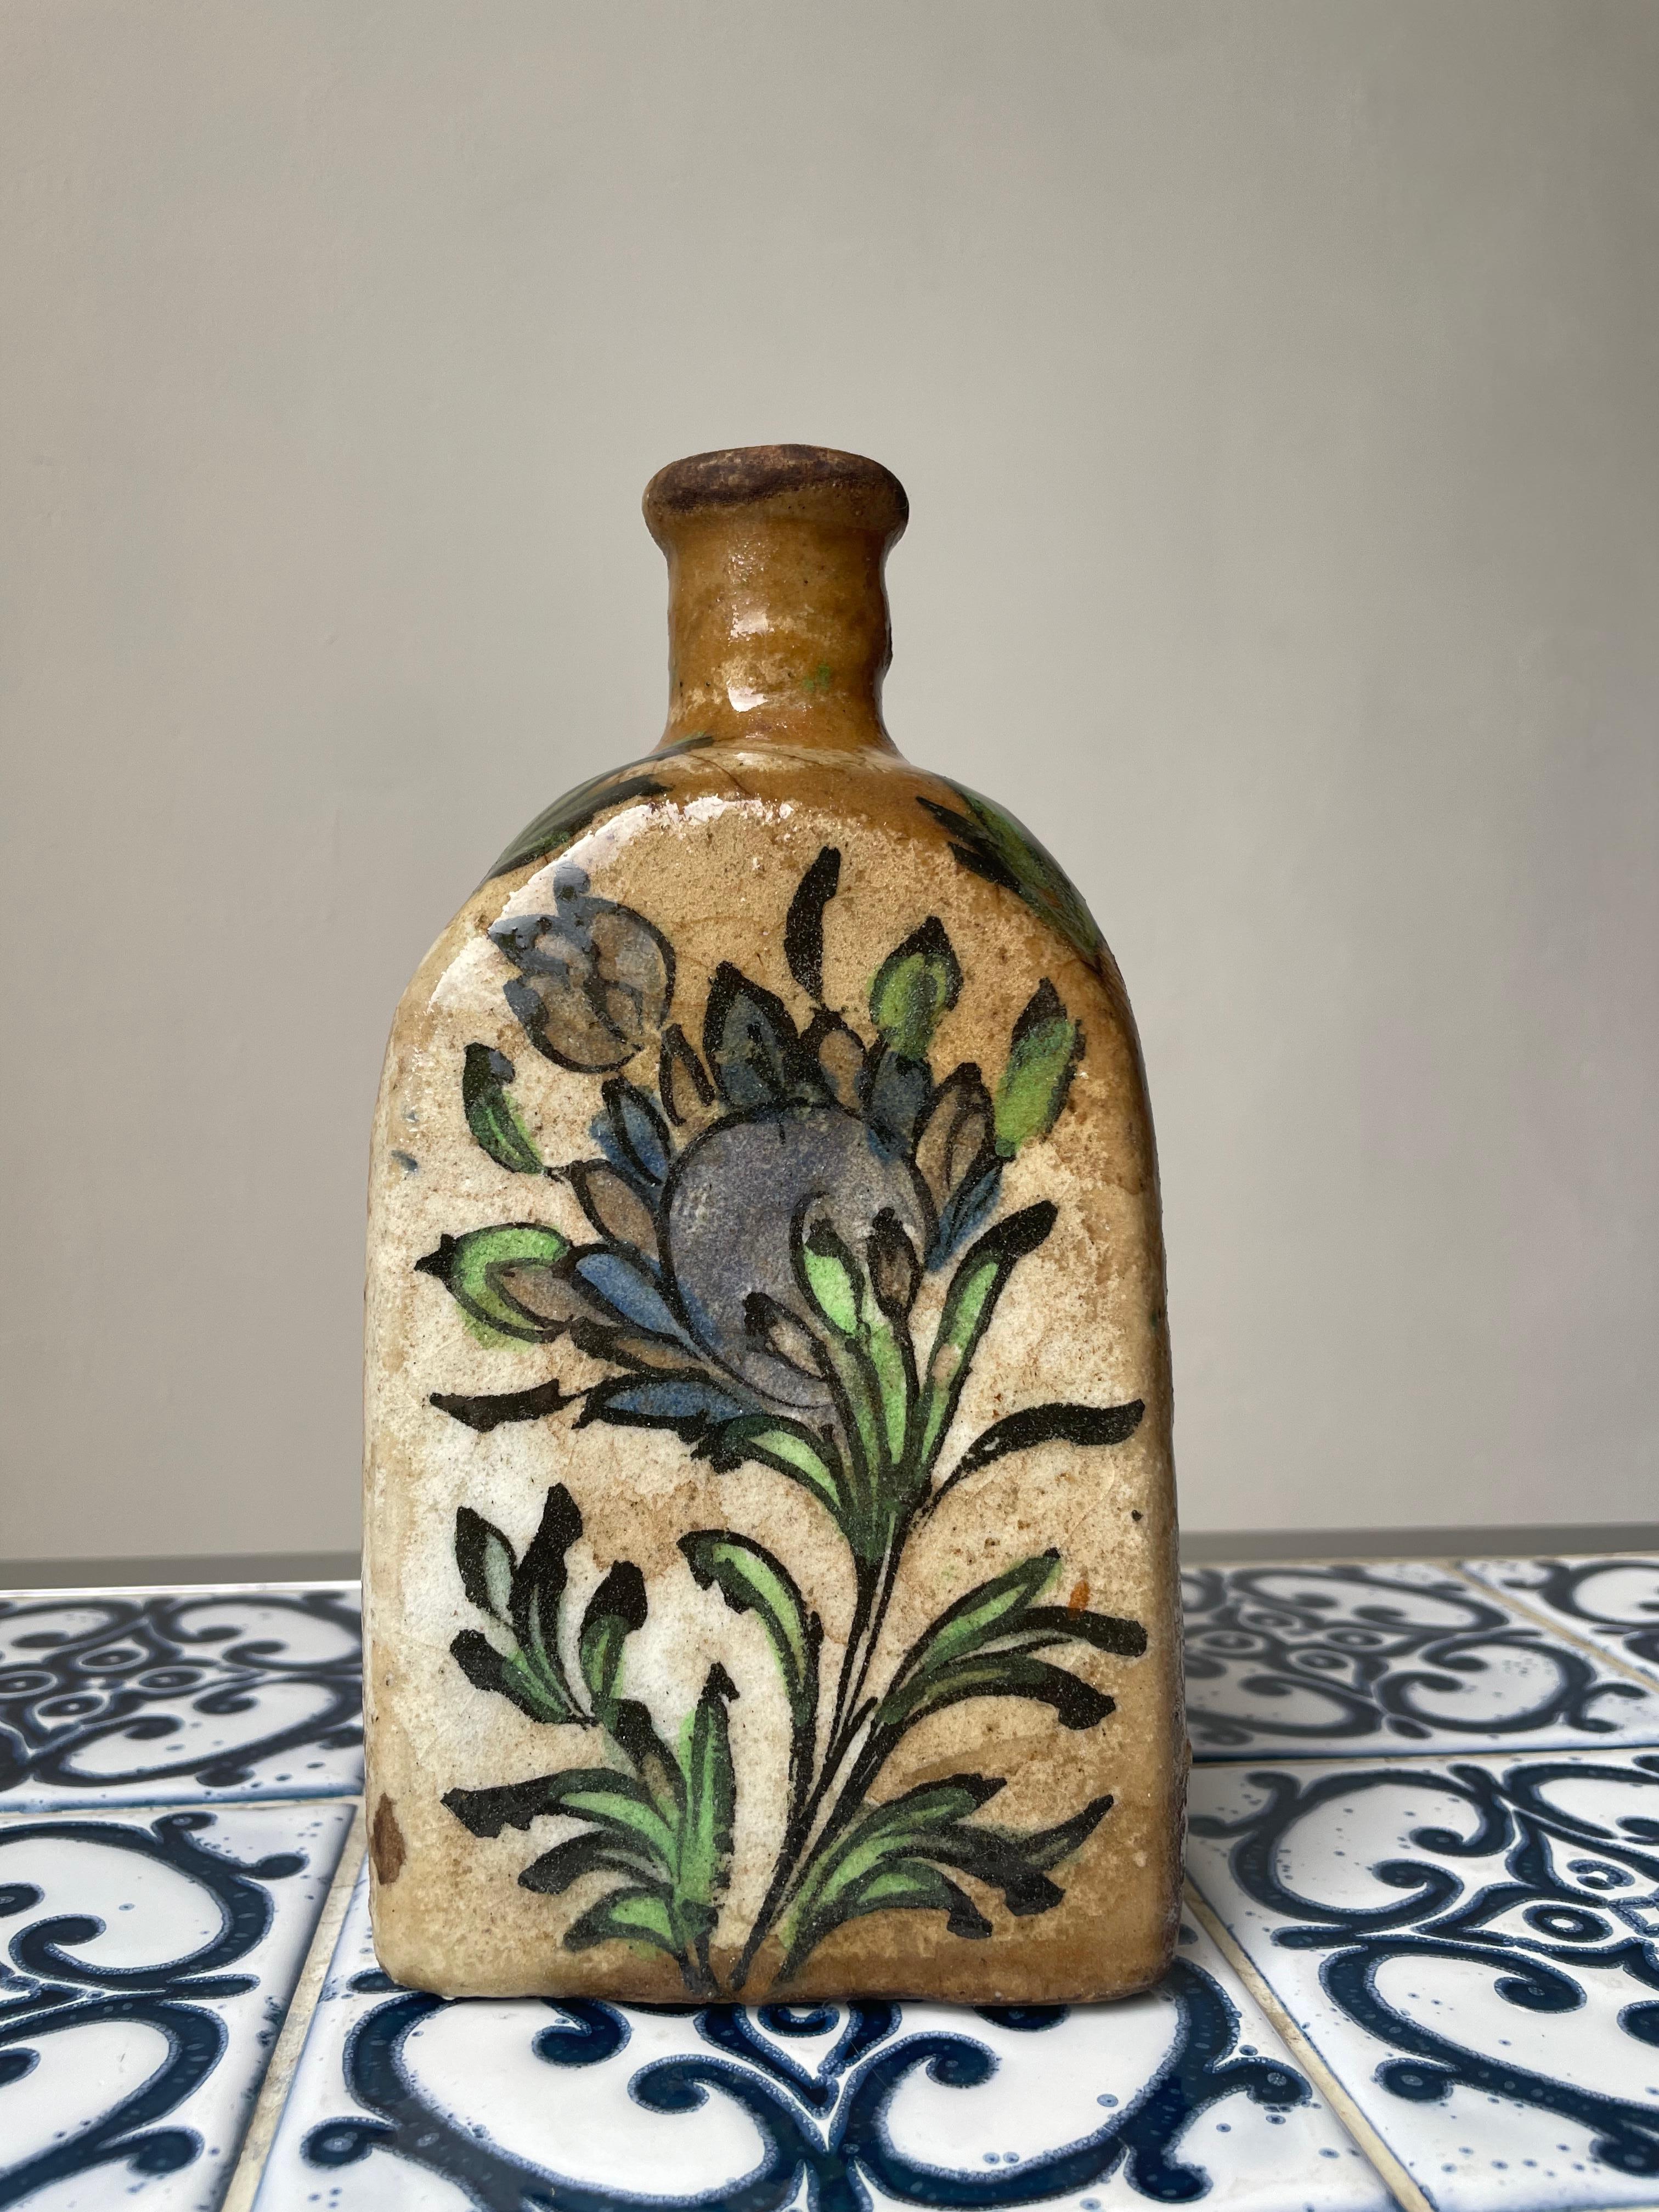 Antique handmade Middle Eastern triangular ceramic tea bottle with hand painted colorful decor and clear glaze. Green and blue colored organic floral decorations on a sand colored base with clear glaze. Manufactured in the era of the Qajar dynasty.